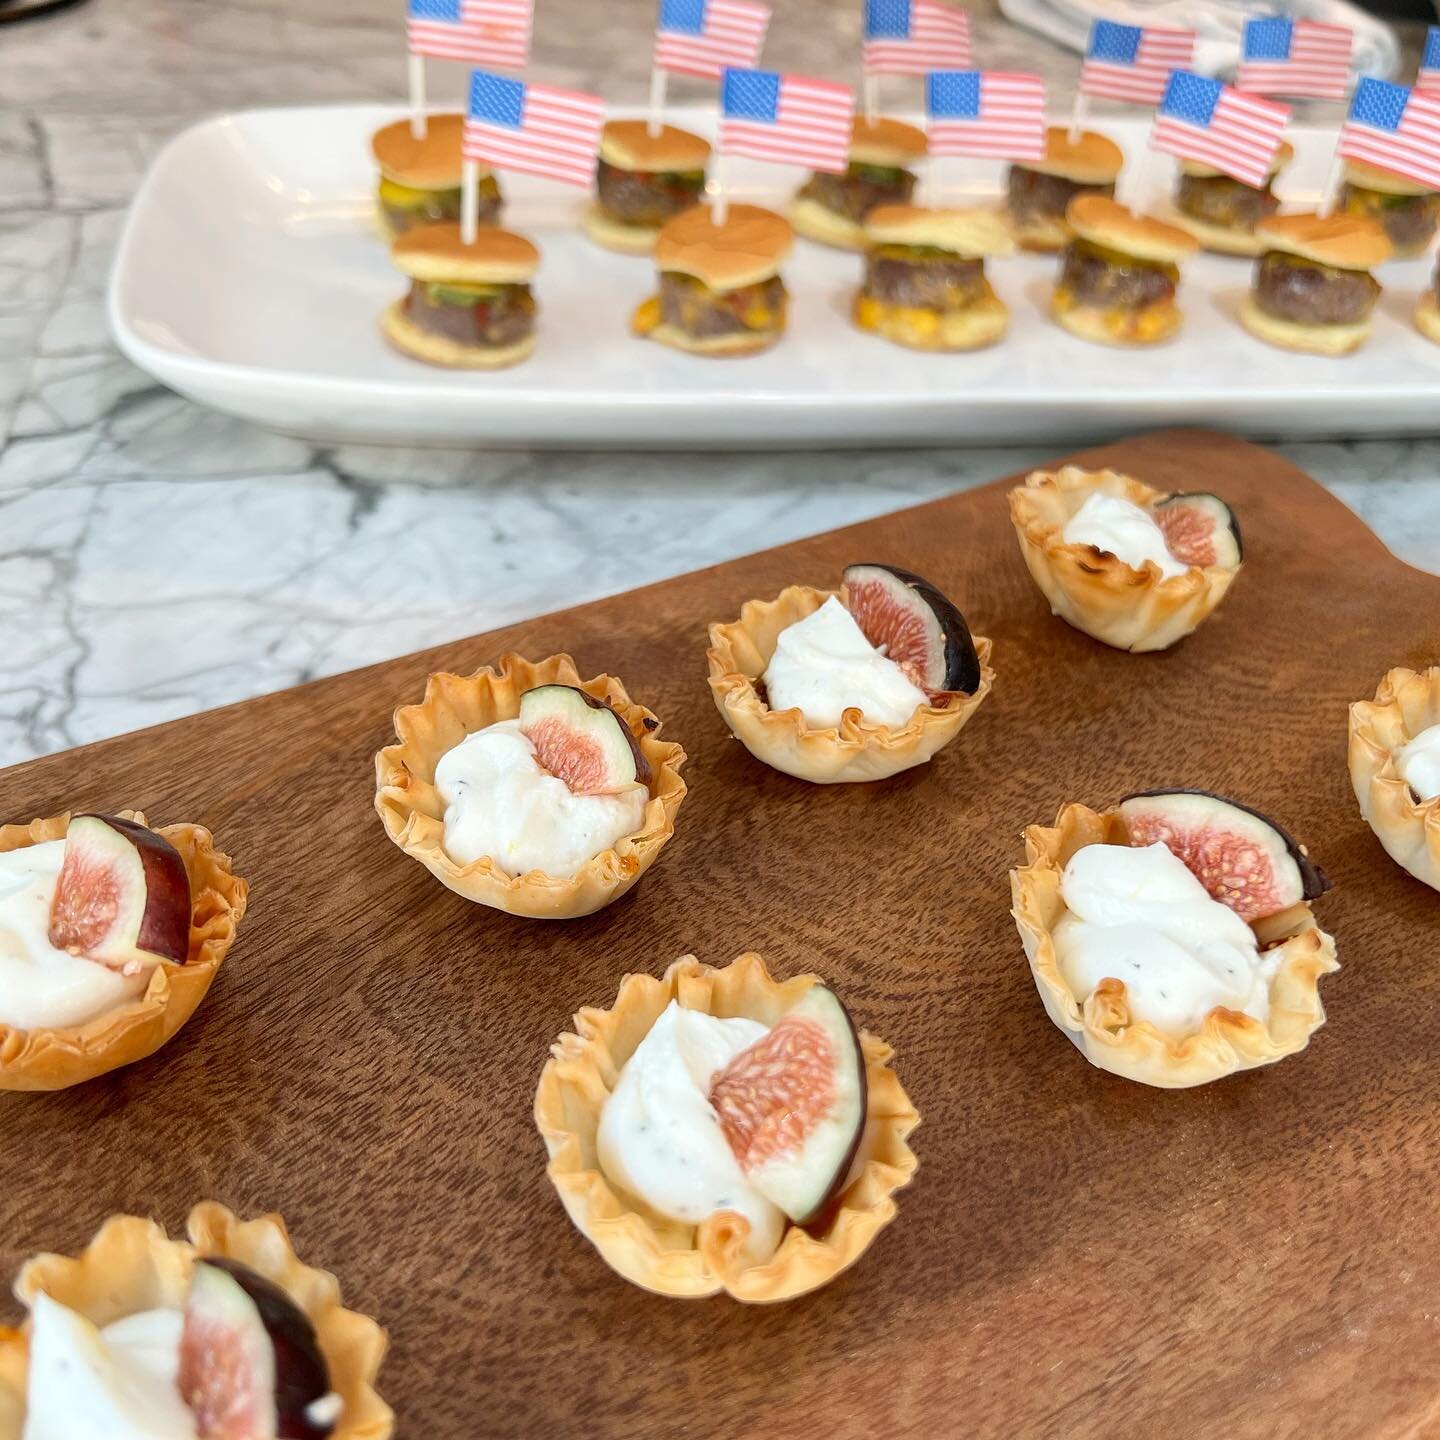 Fig and goat cheese tarts and all American mini burgers for a festive 4th of July bash 🇺🇸

#chefconsultant #cheflife #ctbites #chef #food #catering #personalchef #instafood #chefsofinstagram #foodstagram #foodporn #foodphotography #foodlover #cooki